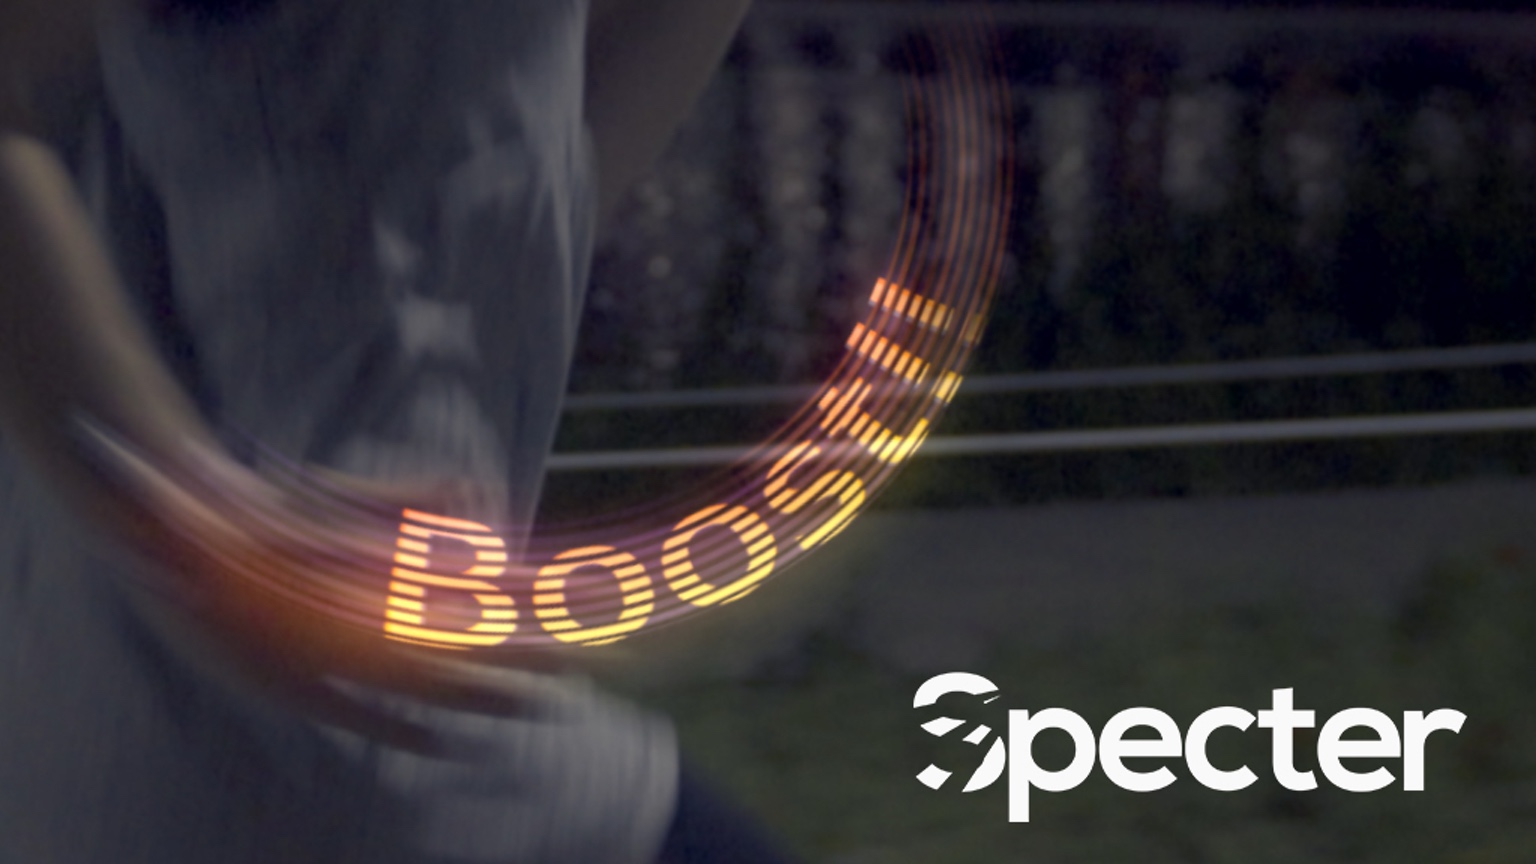 Specter: Safe and Stylish Device for Night Runners &Athletes project video thumbnail